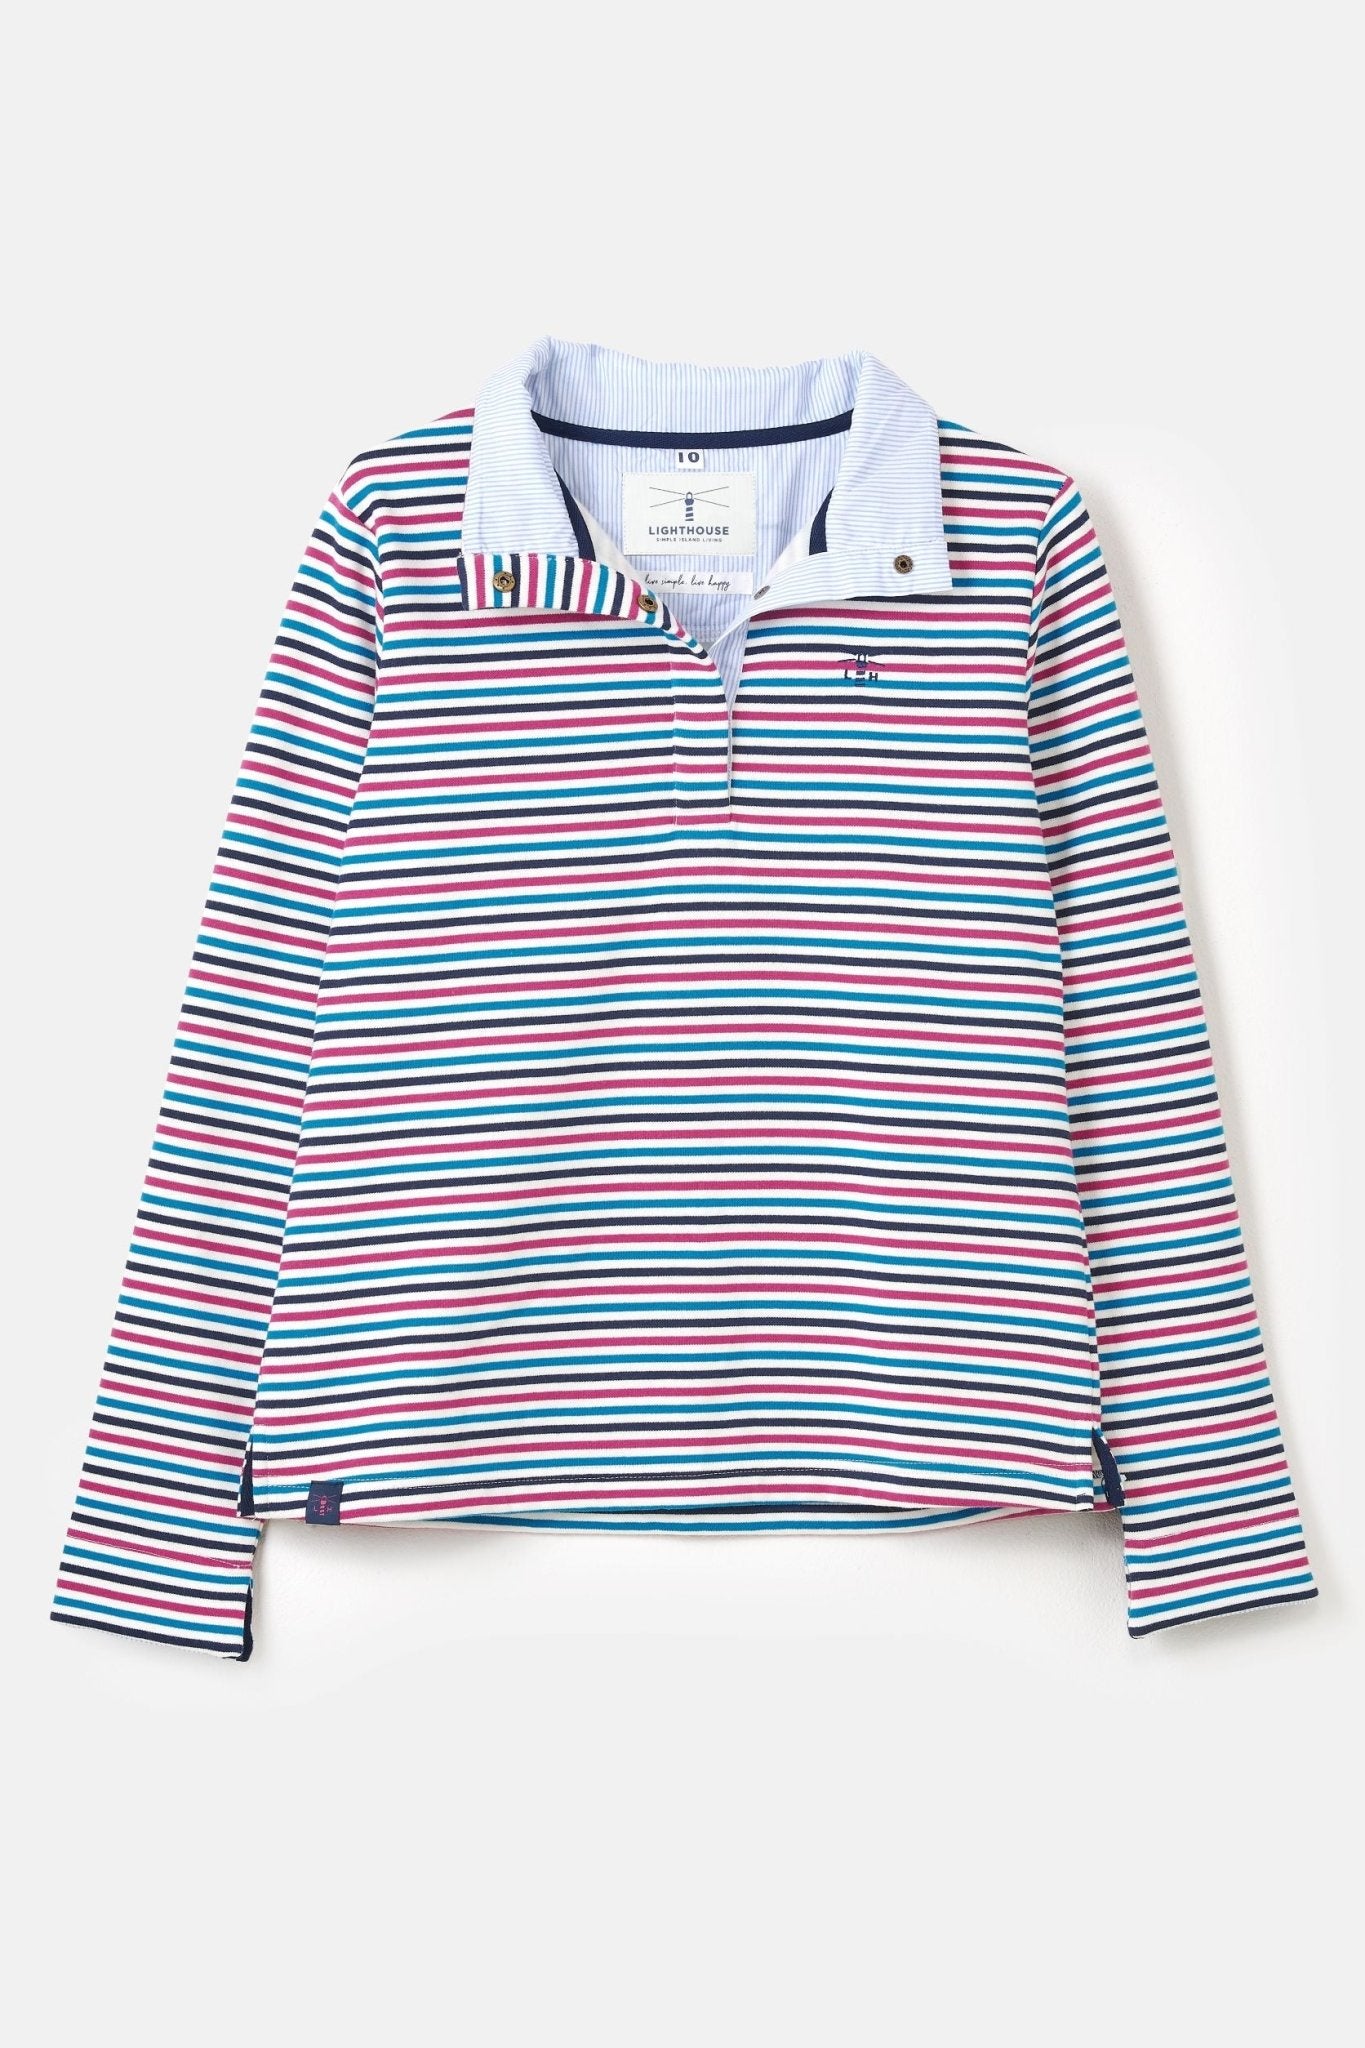 Haven Jersey - Berry Teal Stripe-Lighthouse